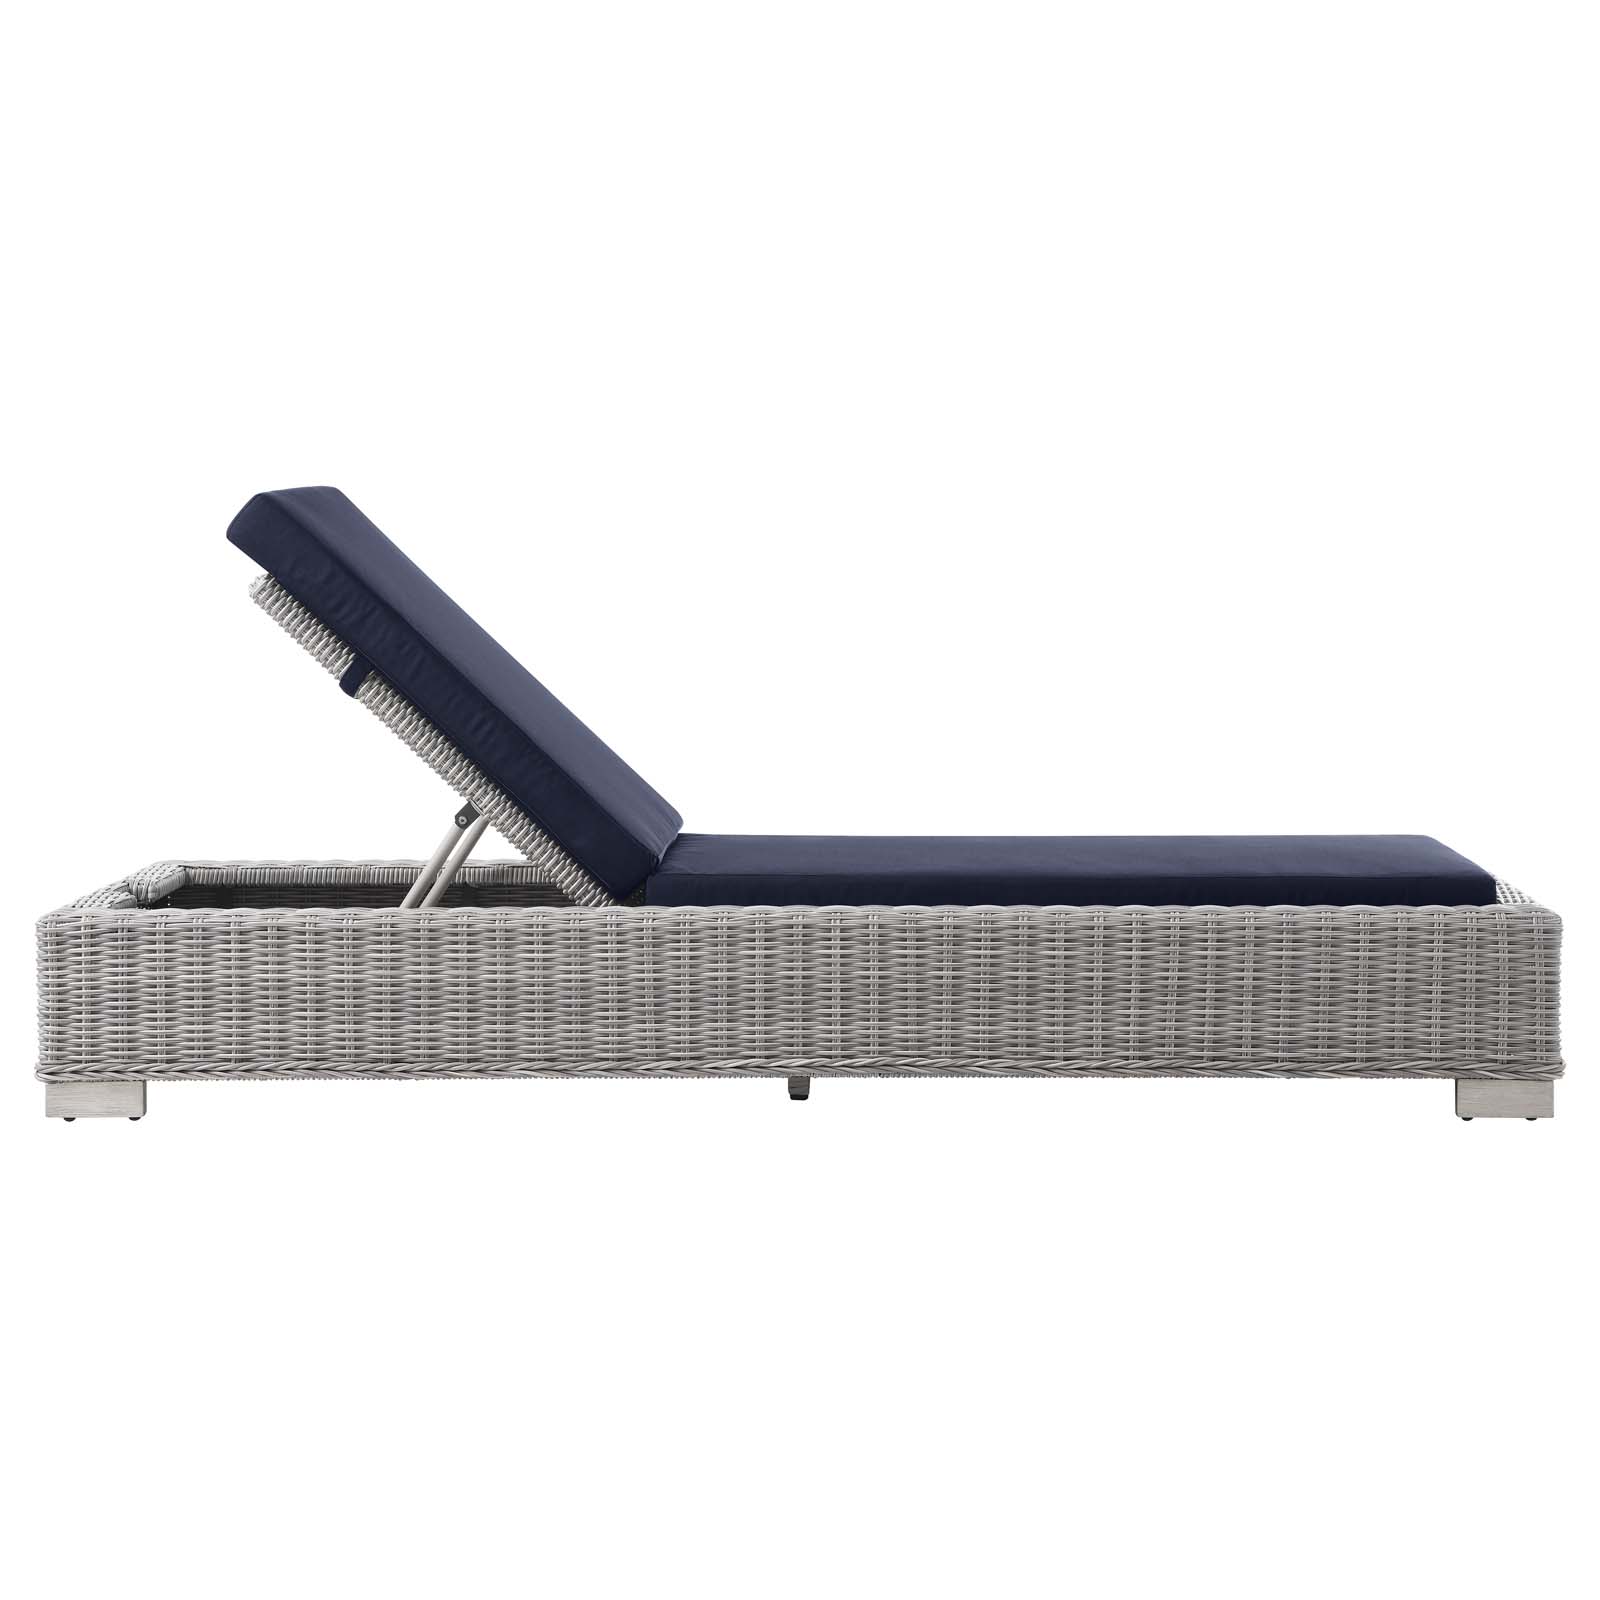 Modway Conway Outdoor Patio Wicker Rattan Chaise Lounge in Light Gray Navy - image 3 of 9